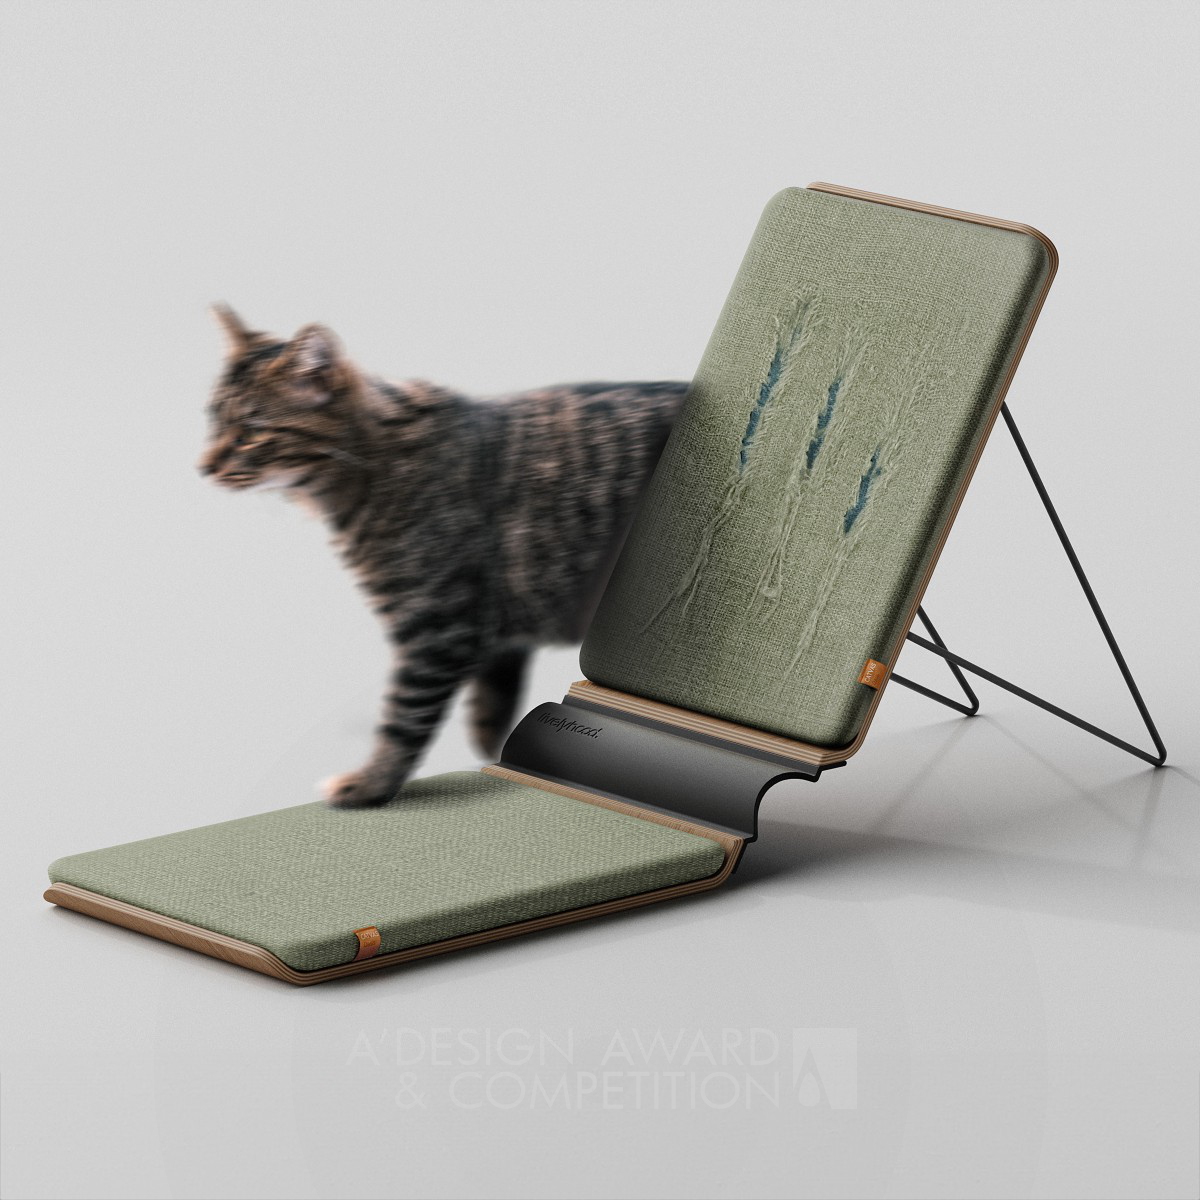 Zhenyang Yan wins Iron at the prestigious A' Pet Care, Toys, Supplies and Products for Animals Design Award with Catvas cat scratching board .